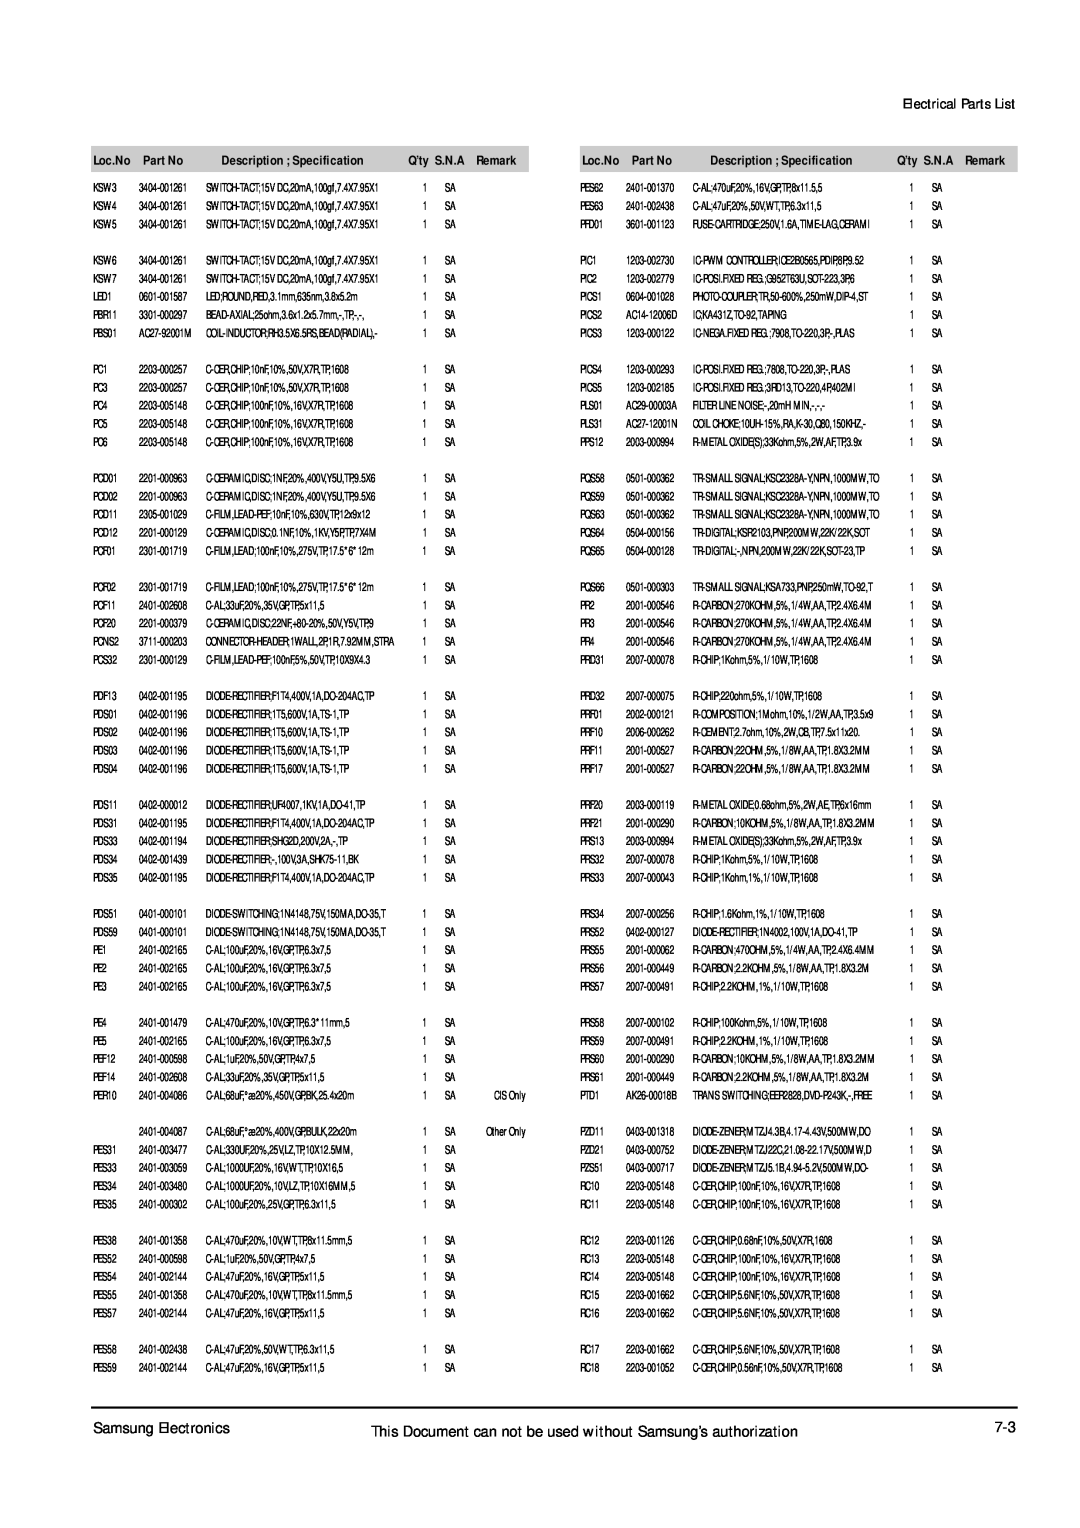 Samsung DVD-P355B/XEV Samsung Electronics, This Document can not be used without Samsung’s authorization, S.N.A 